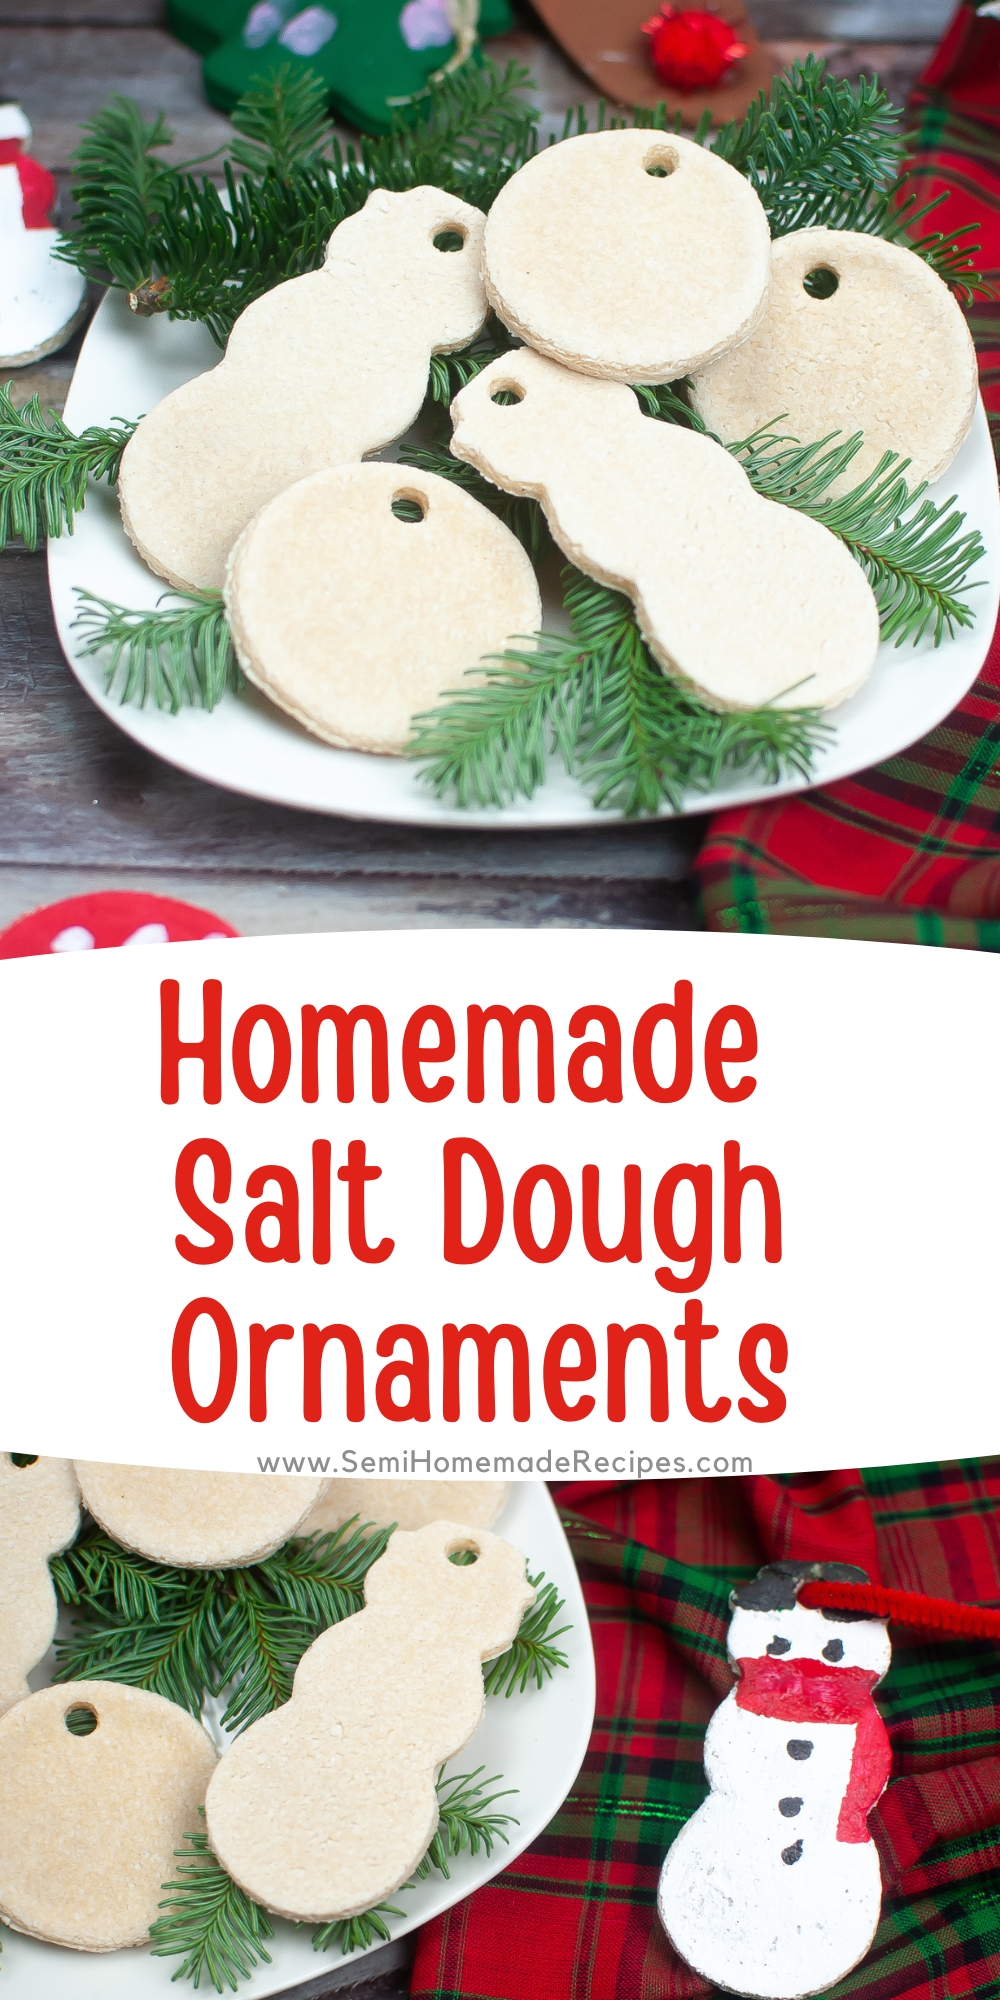 Get inspired to create homemade salt dough ornaments for more than just Christmas. This article will guide you through innovative ideas and designs that can be adapted for various holidays, celebrations, and special occasions. From personalized gifts to unique decorations, let your imagination run wild with salt dough.